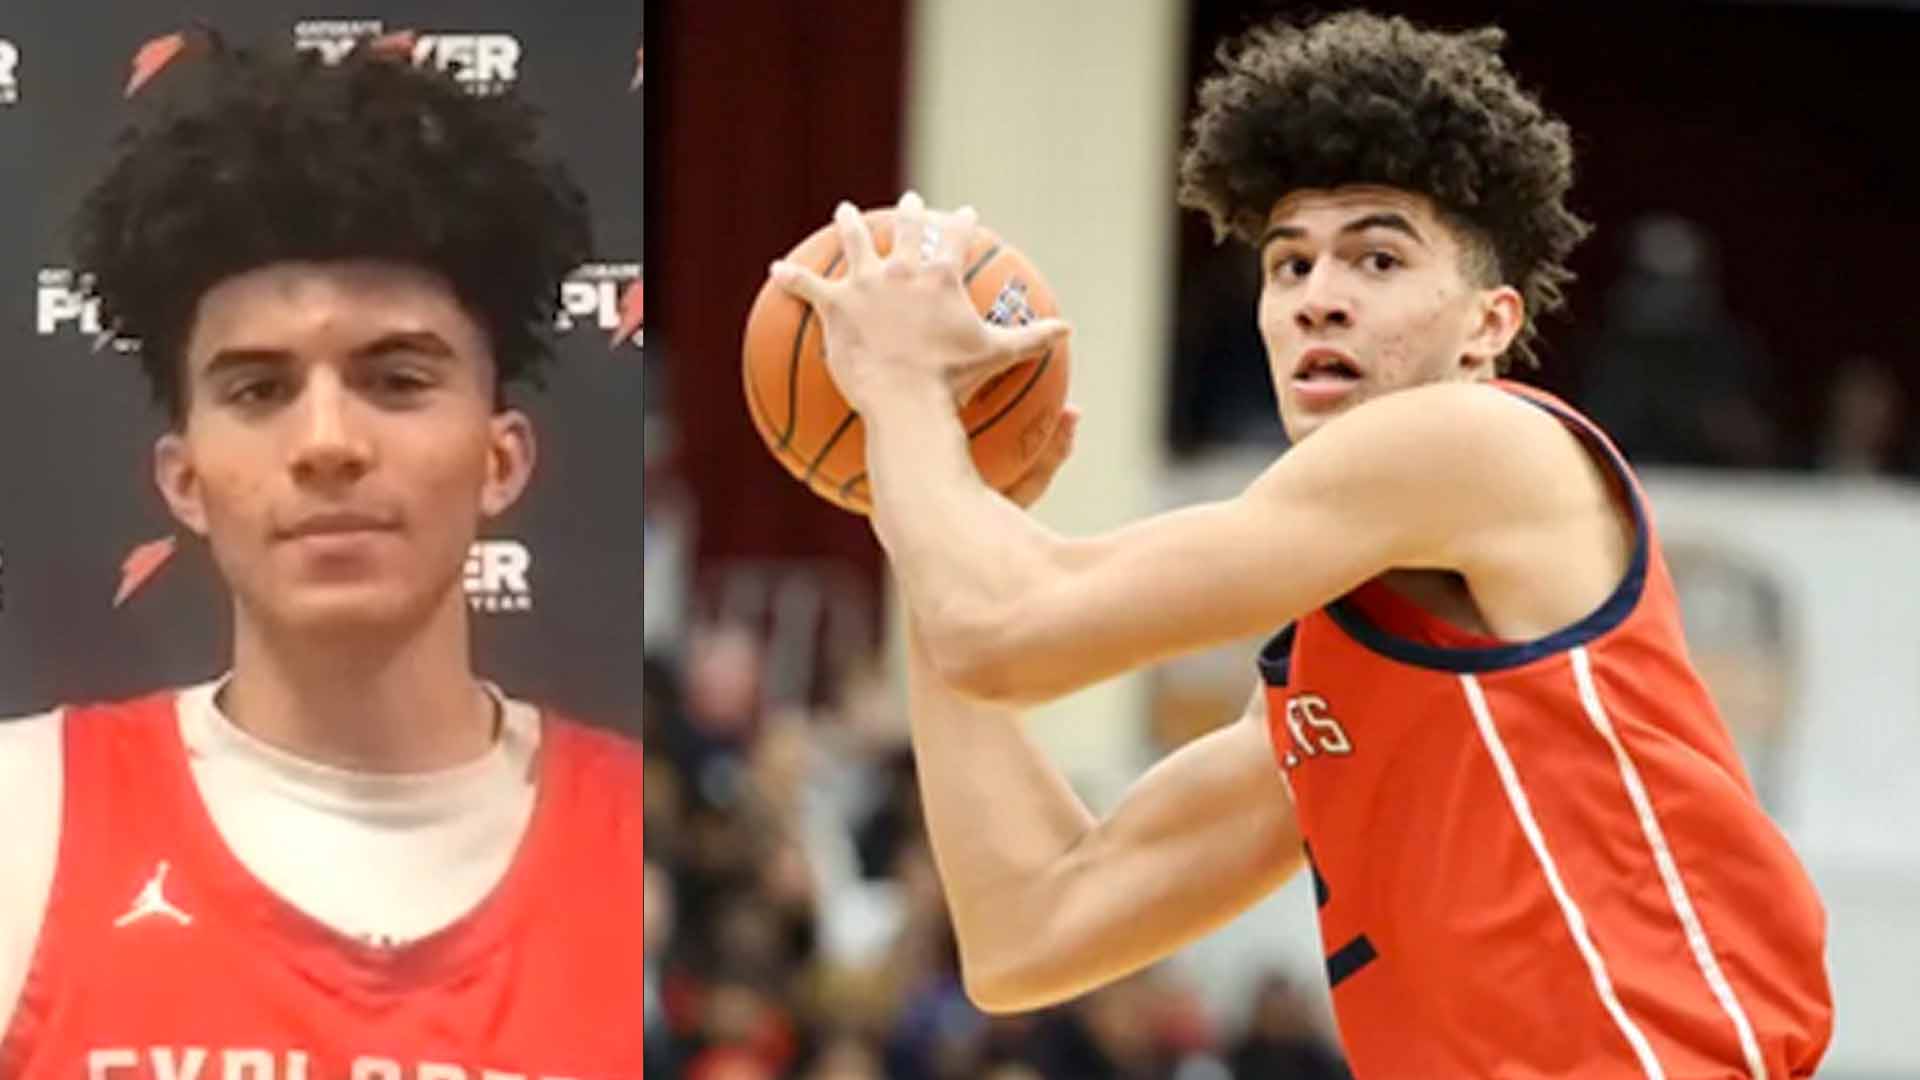 No. 1 prospect Cameron Boozer wins National Player of the Year Award